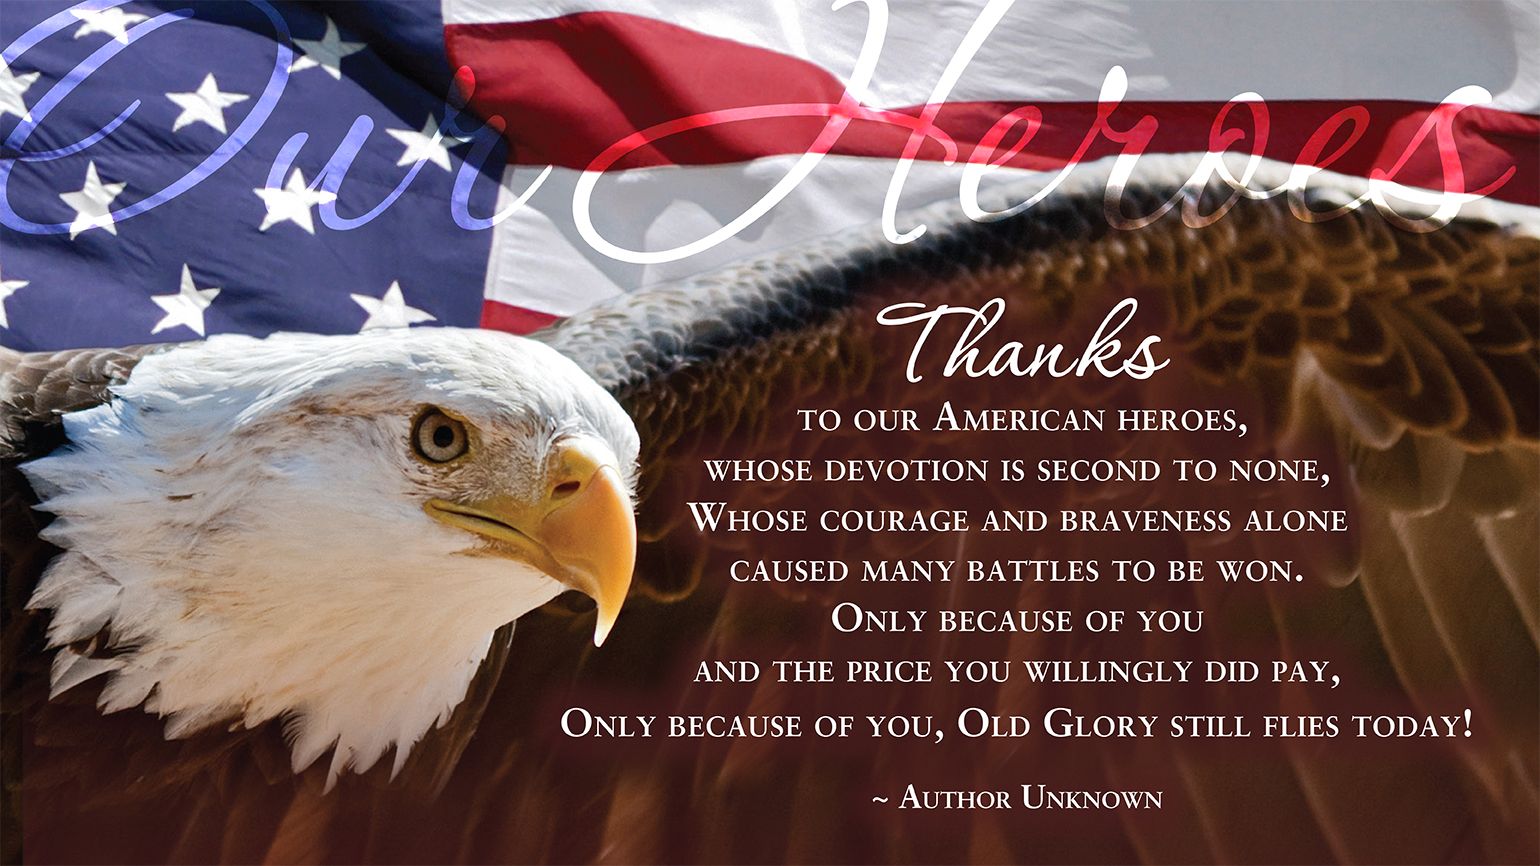 An eagle flies, wings spread, over a poem of gratitude to our veterans and troops